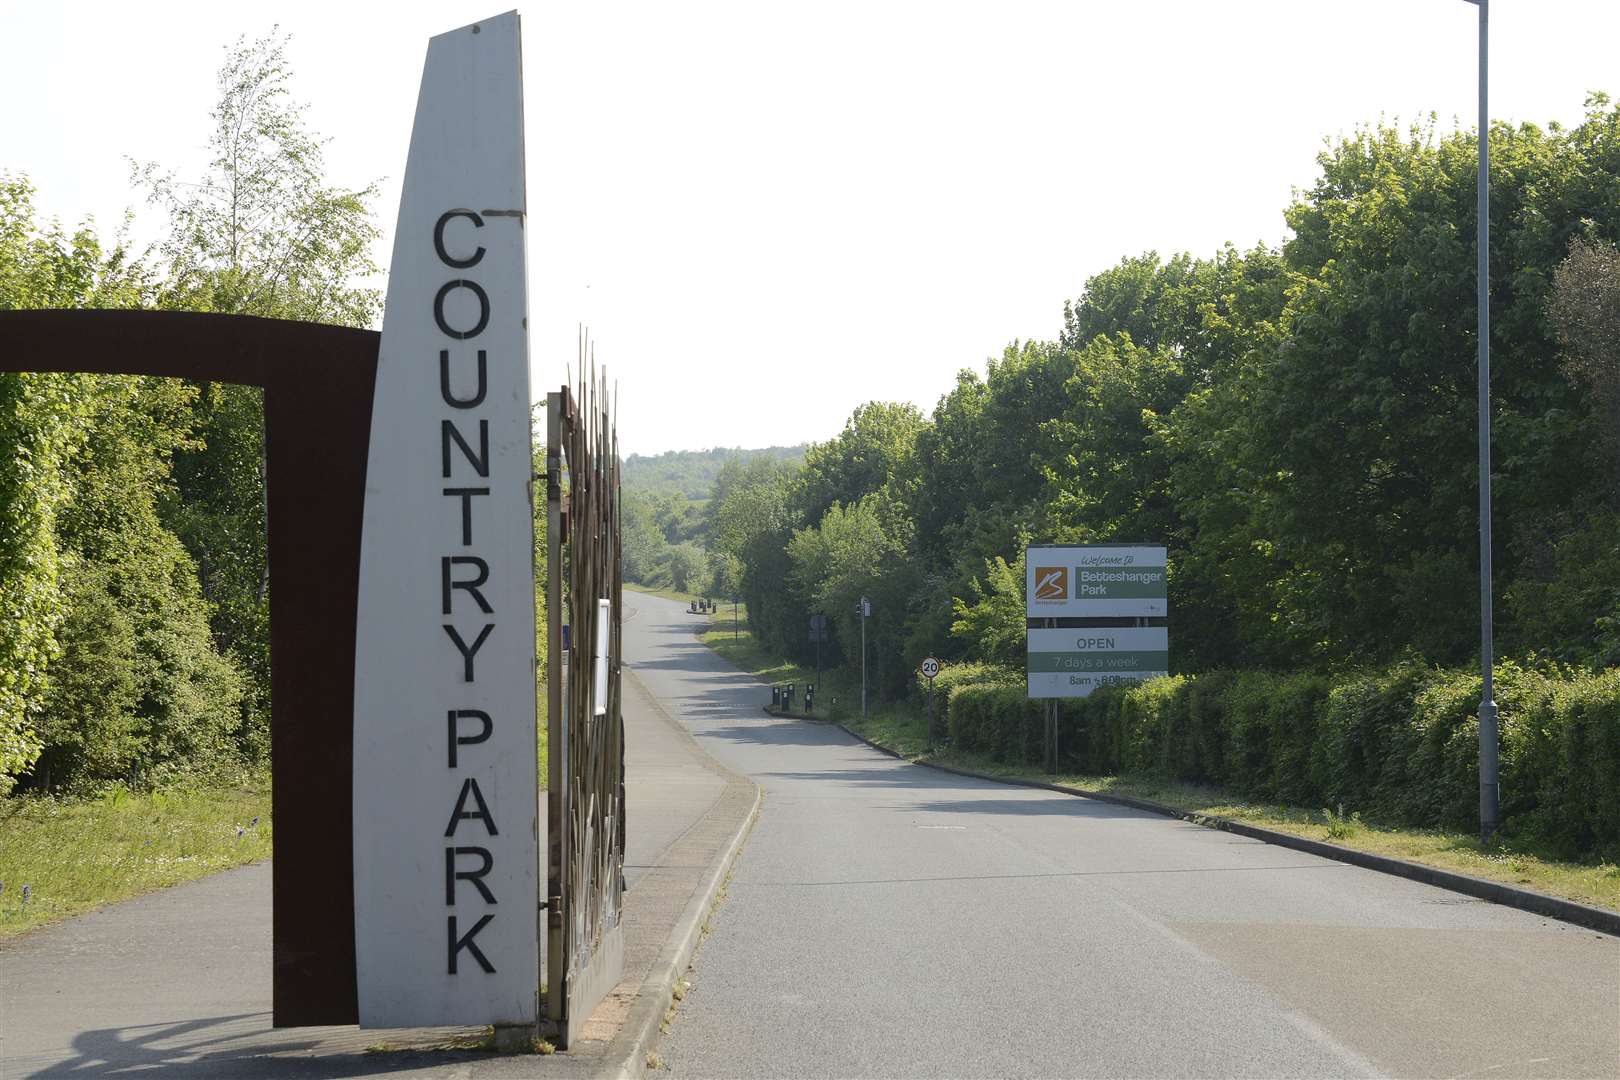 Betteshanger Country Park began the process of reopening on June 1